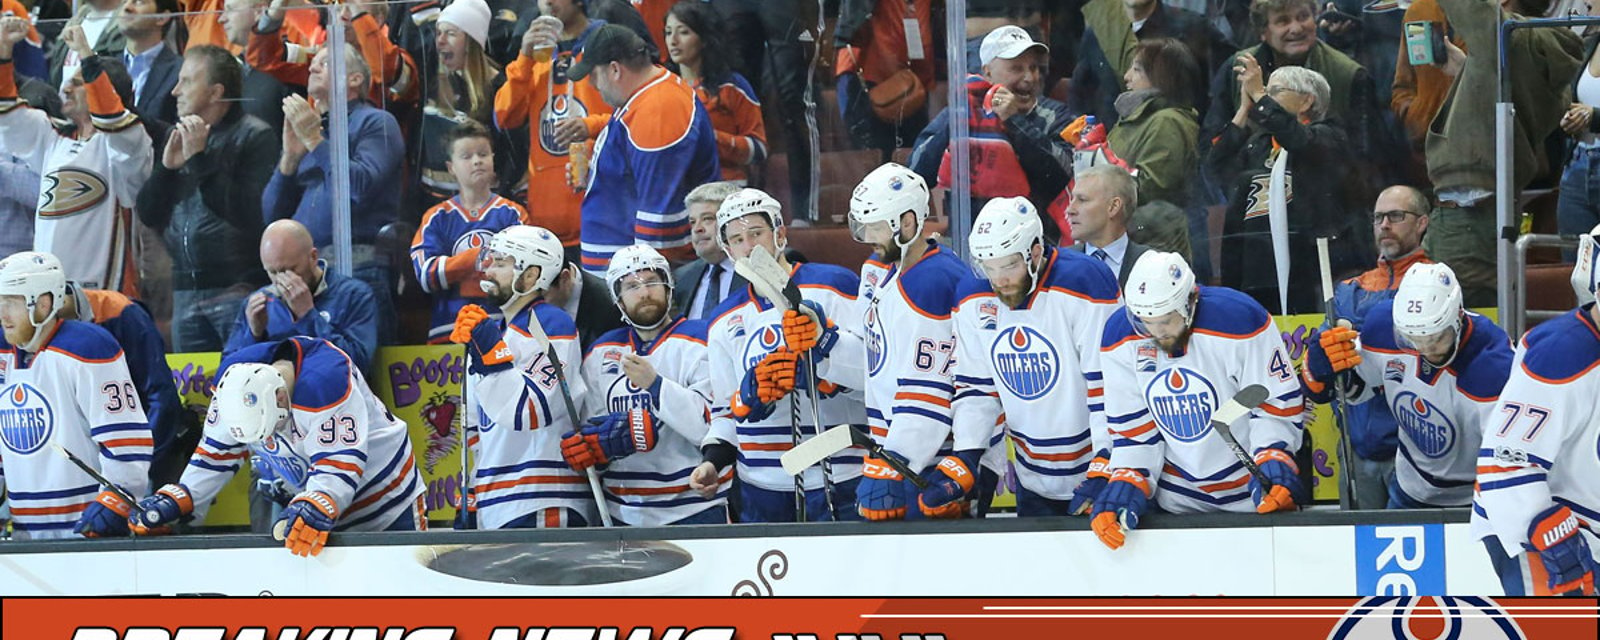 BREAKING: Promising, young defenceman's career in jeopardy with Oilers